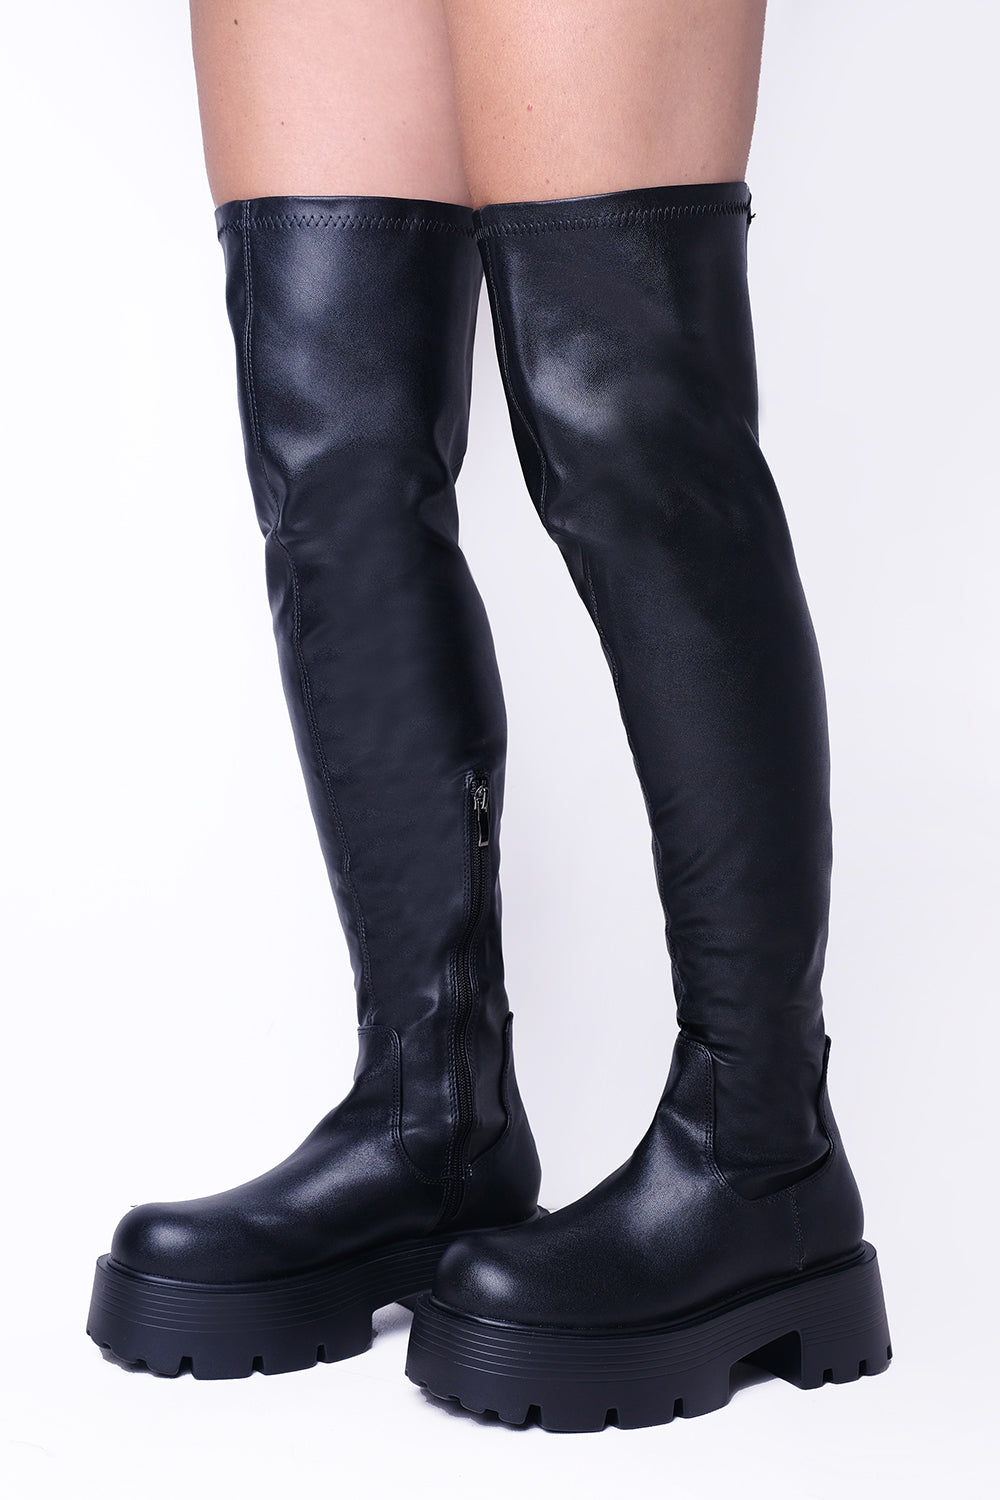 Black PU Chunky Chelsea Calf High Boots With Side Zip